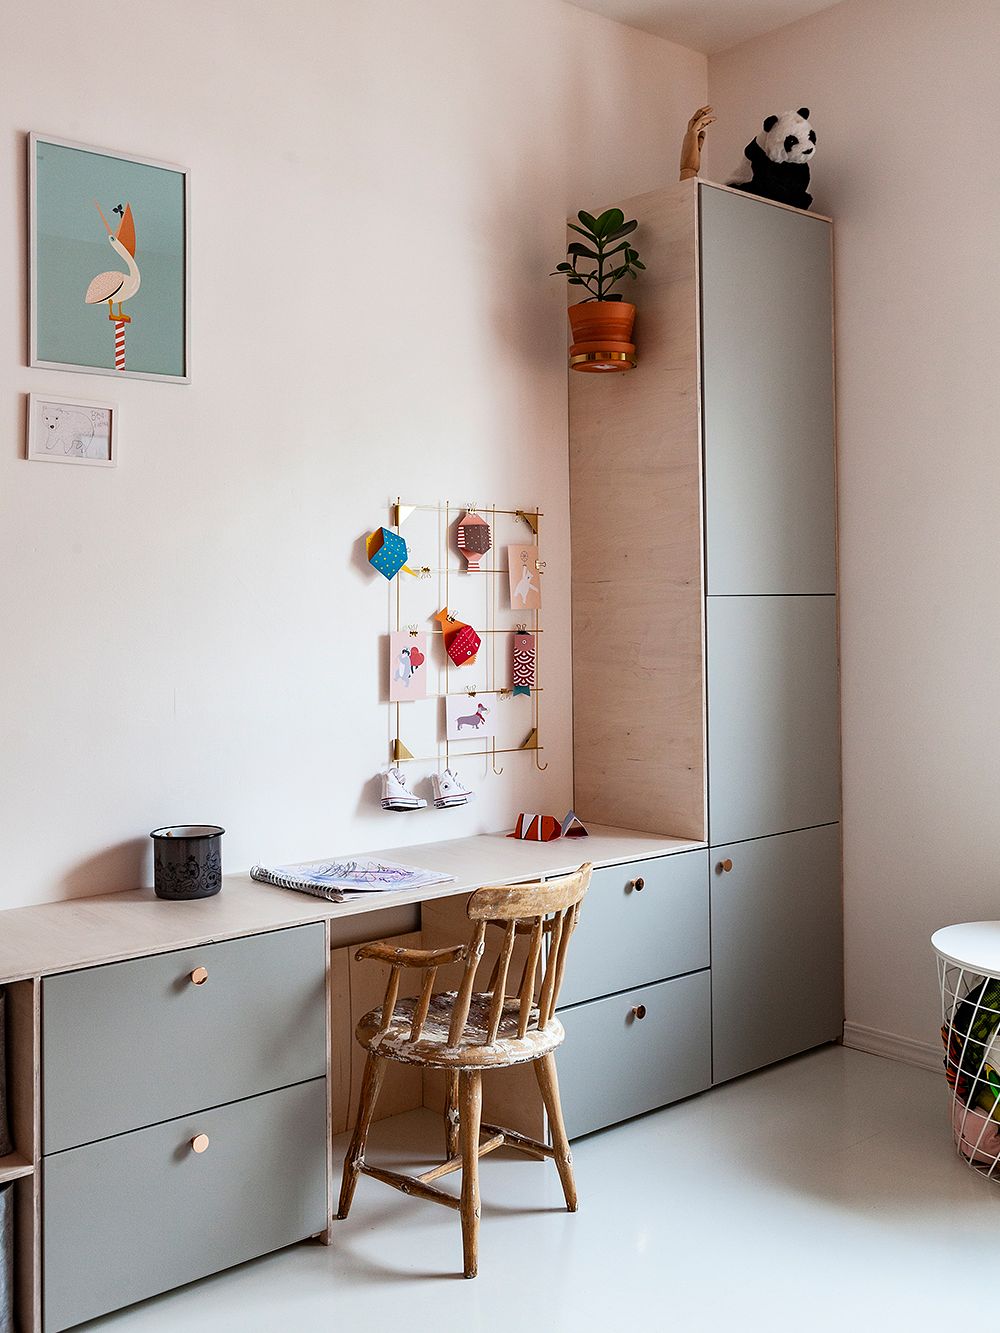 Anni and Heikki renovated a two-bedroom home in Helsinki | Design Stories